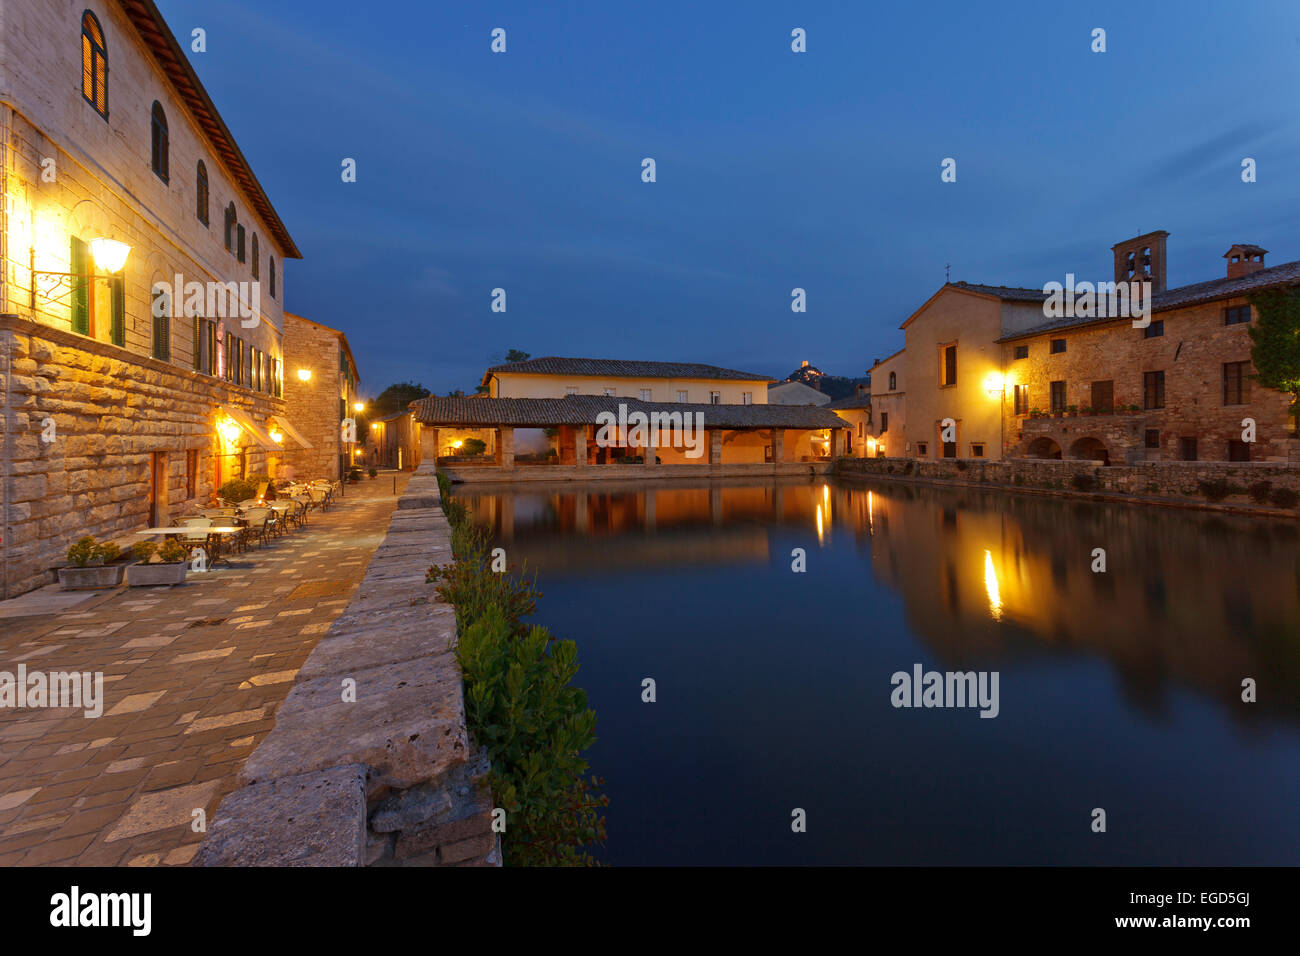 Ancient village of Bagno Vignoni with thermal waters, 16th century, Hotel Restaurant Le Therme, Bagno Vignoni, Val d'Orcia, Orcia valley, UNESCO World Heritage Site, province of Siena, Tuscany, Italy, Europe Stock Photo